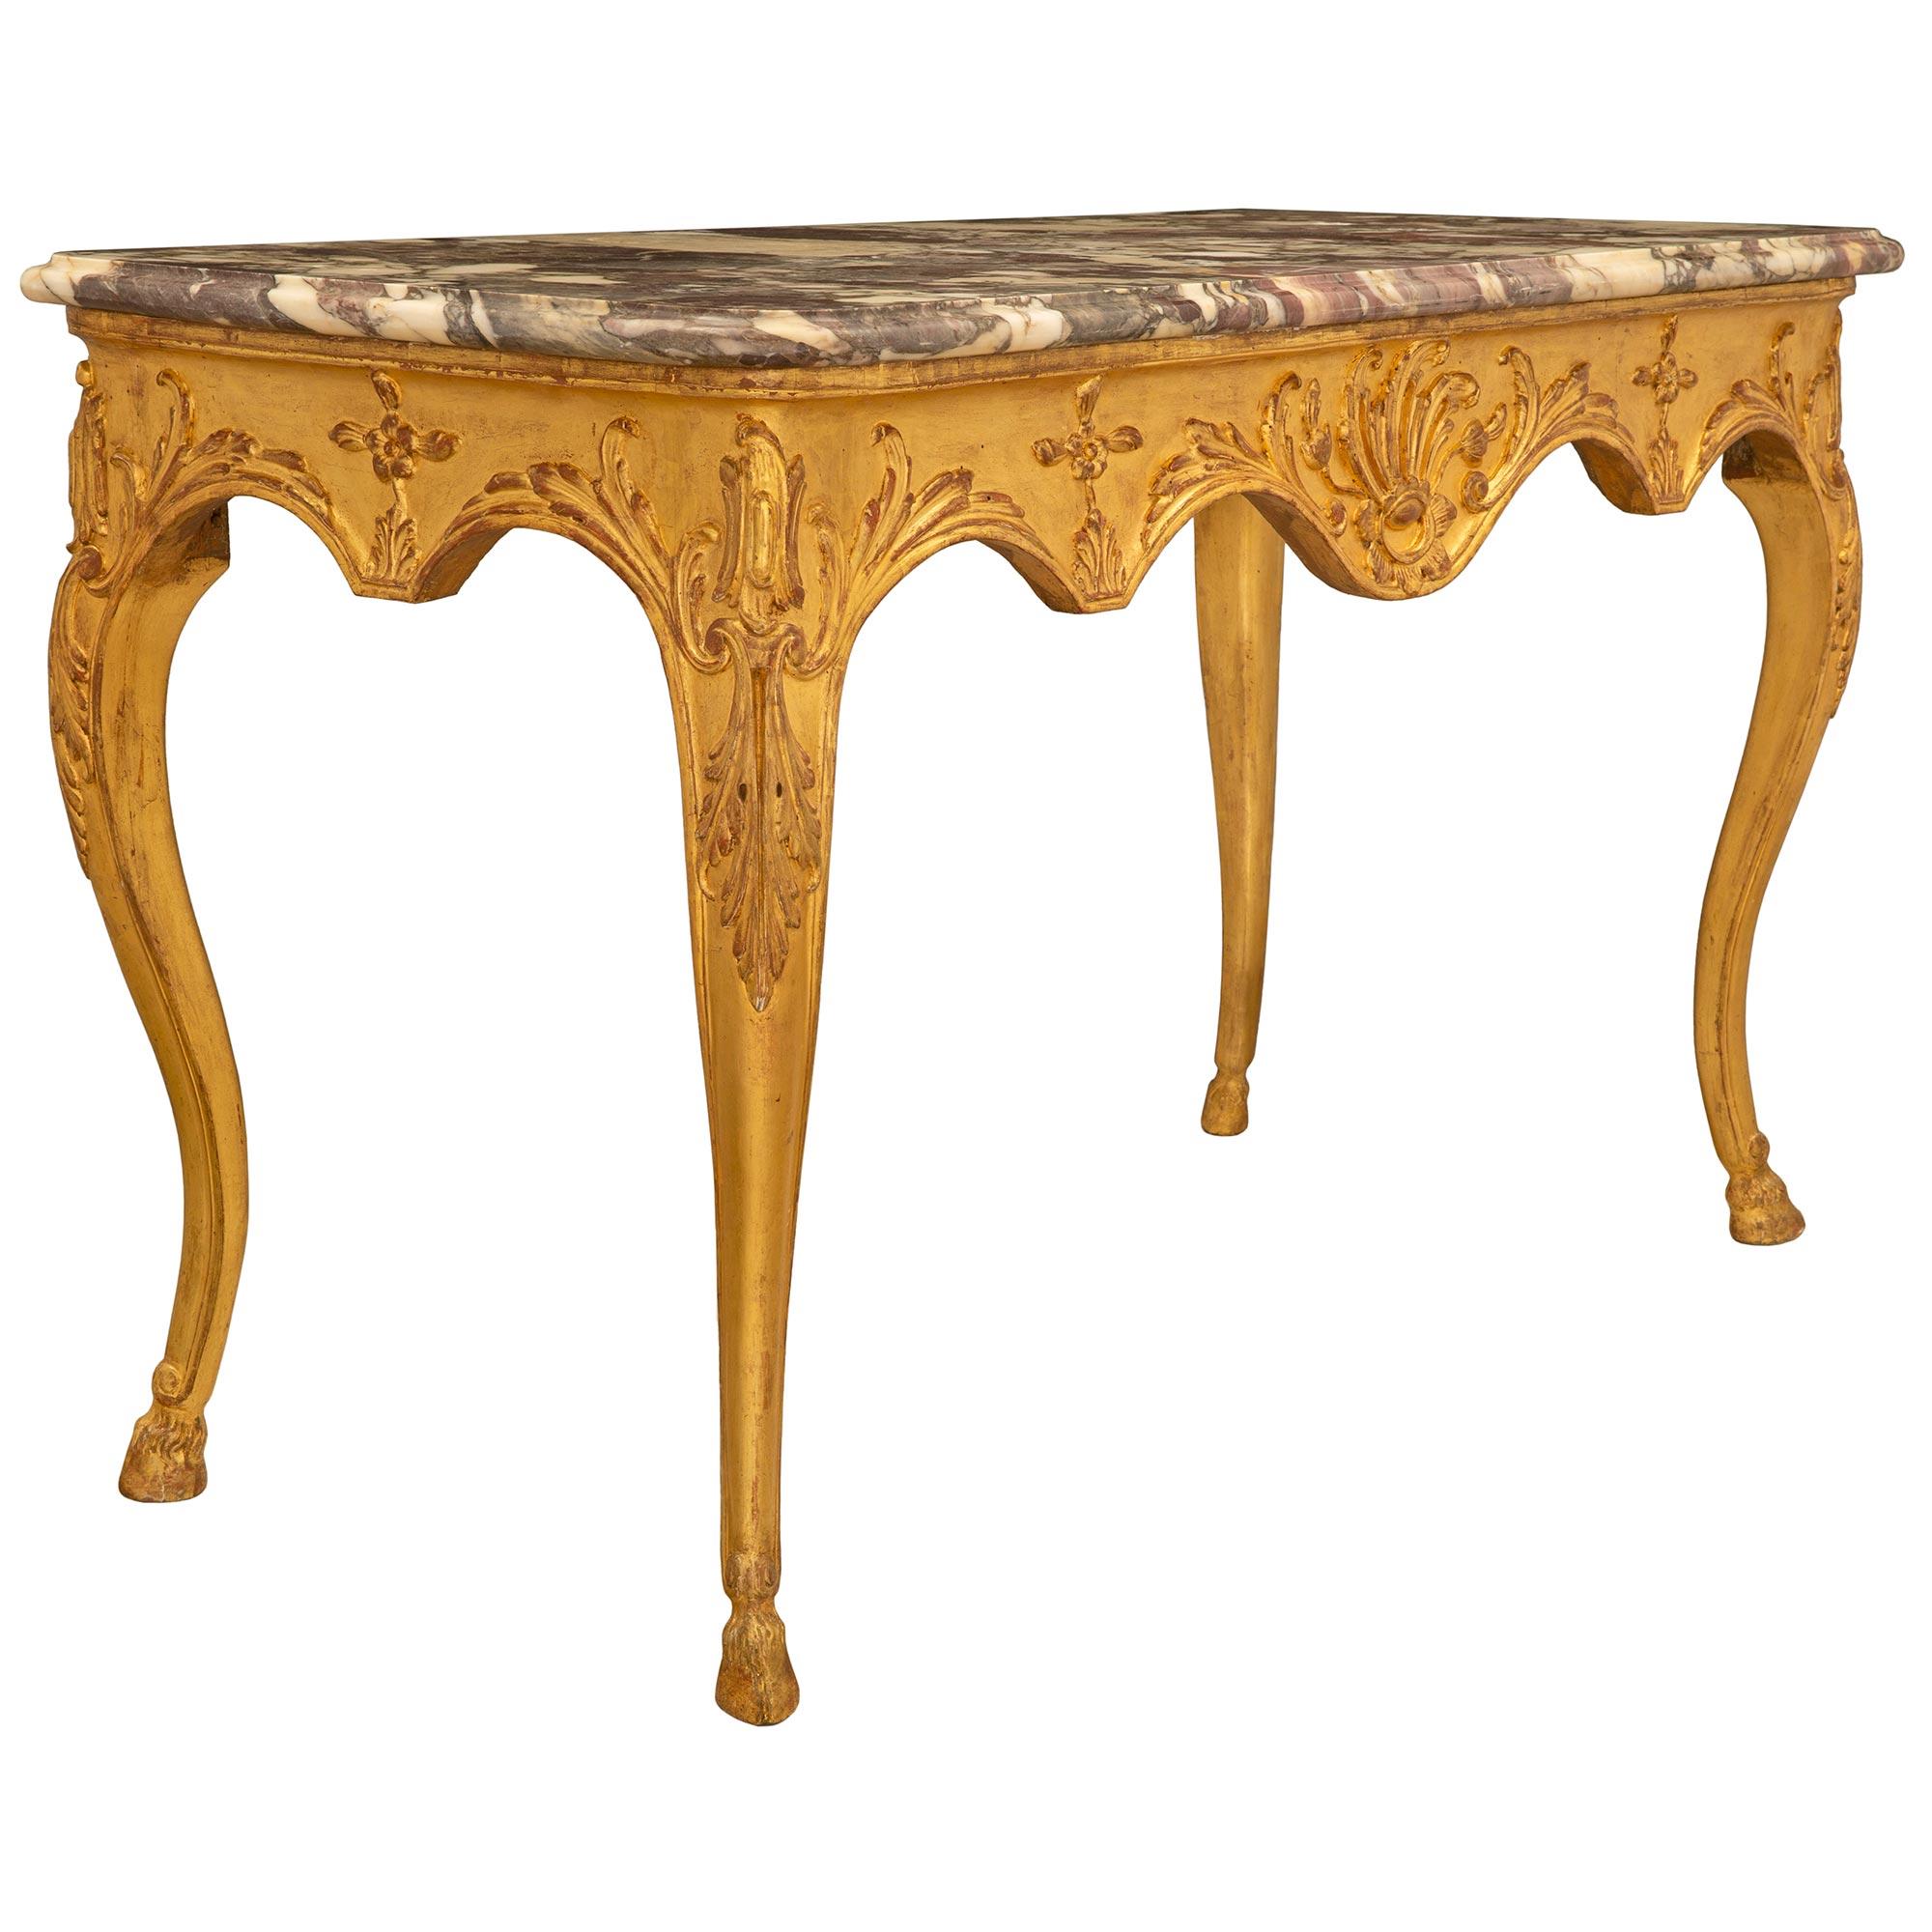 Italian Mid-18th Century Louis XV Period Giltwood and Marble Center Table In Good Condition For Sale In West Palm Beach, FL